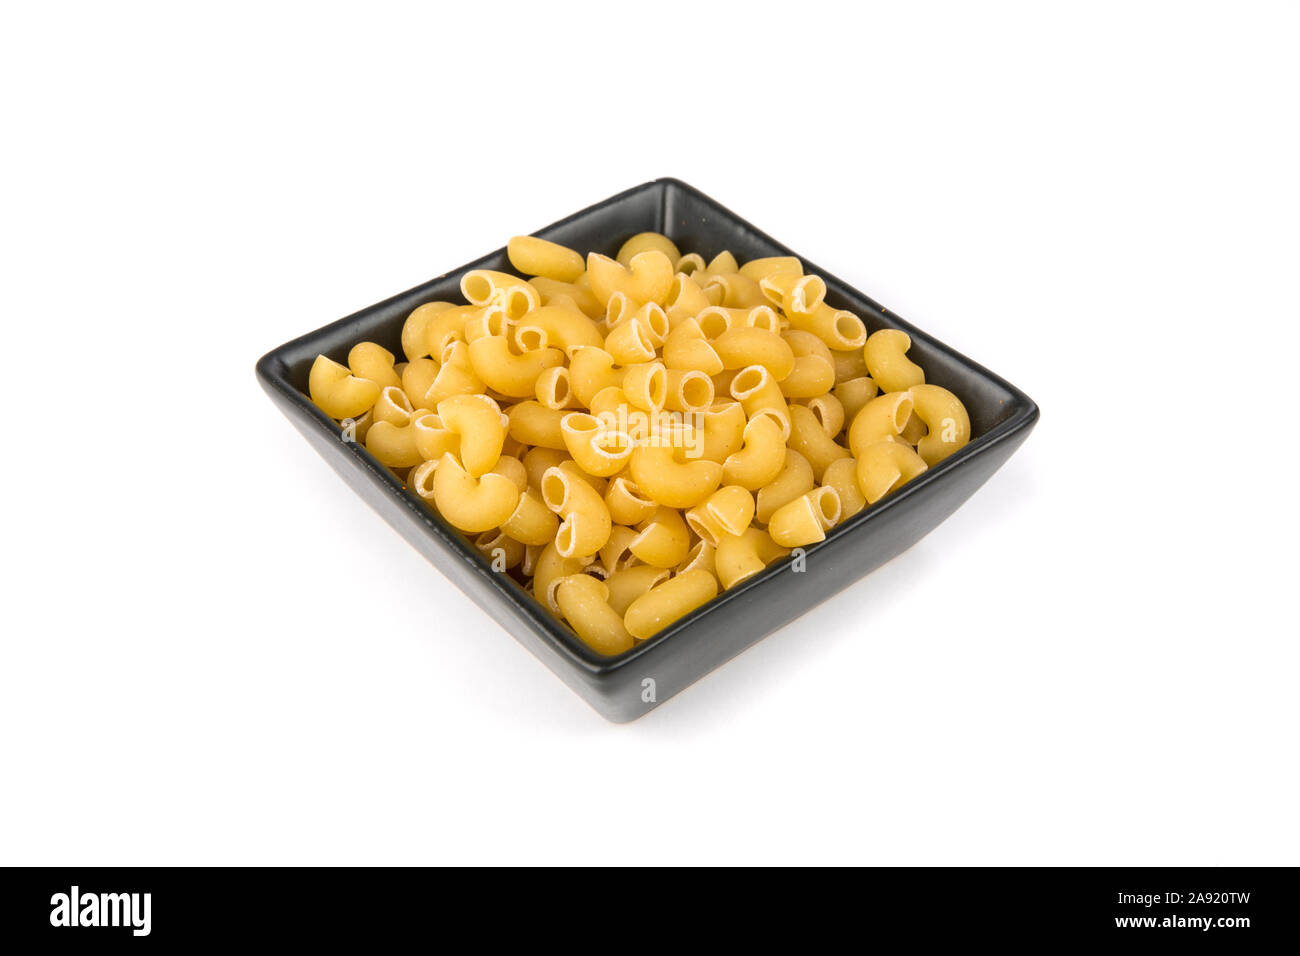 Download Pile Of Yellow Dried Elbow Macaroni Pasta Shapes Stock Photo Alamy Yellowimages Mockups